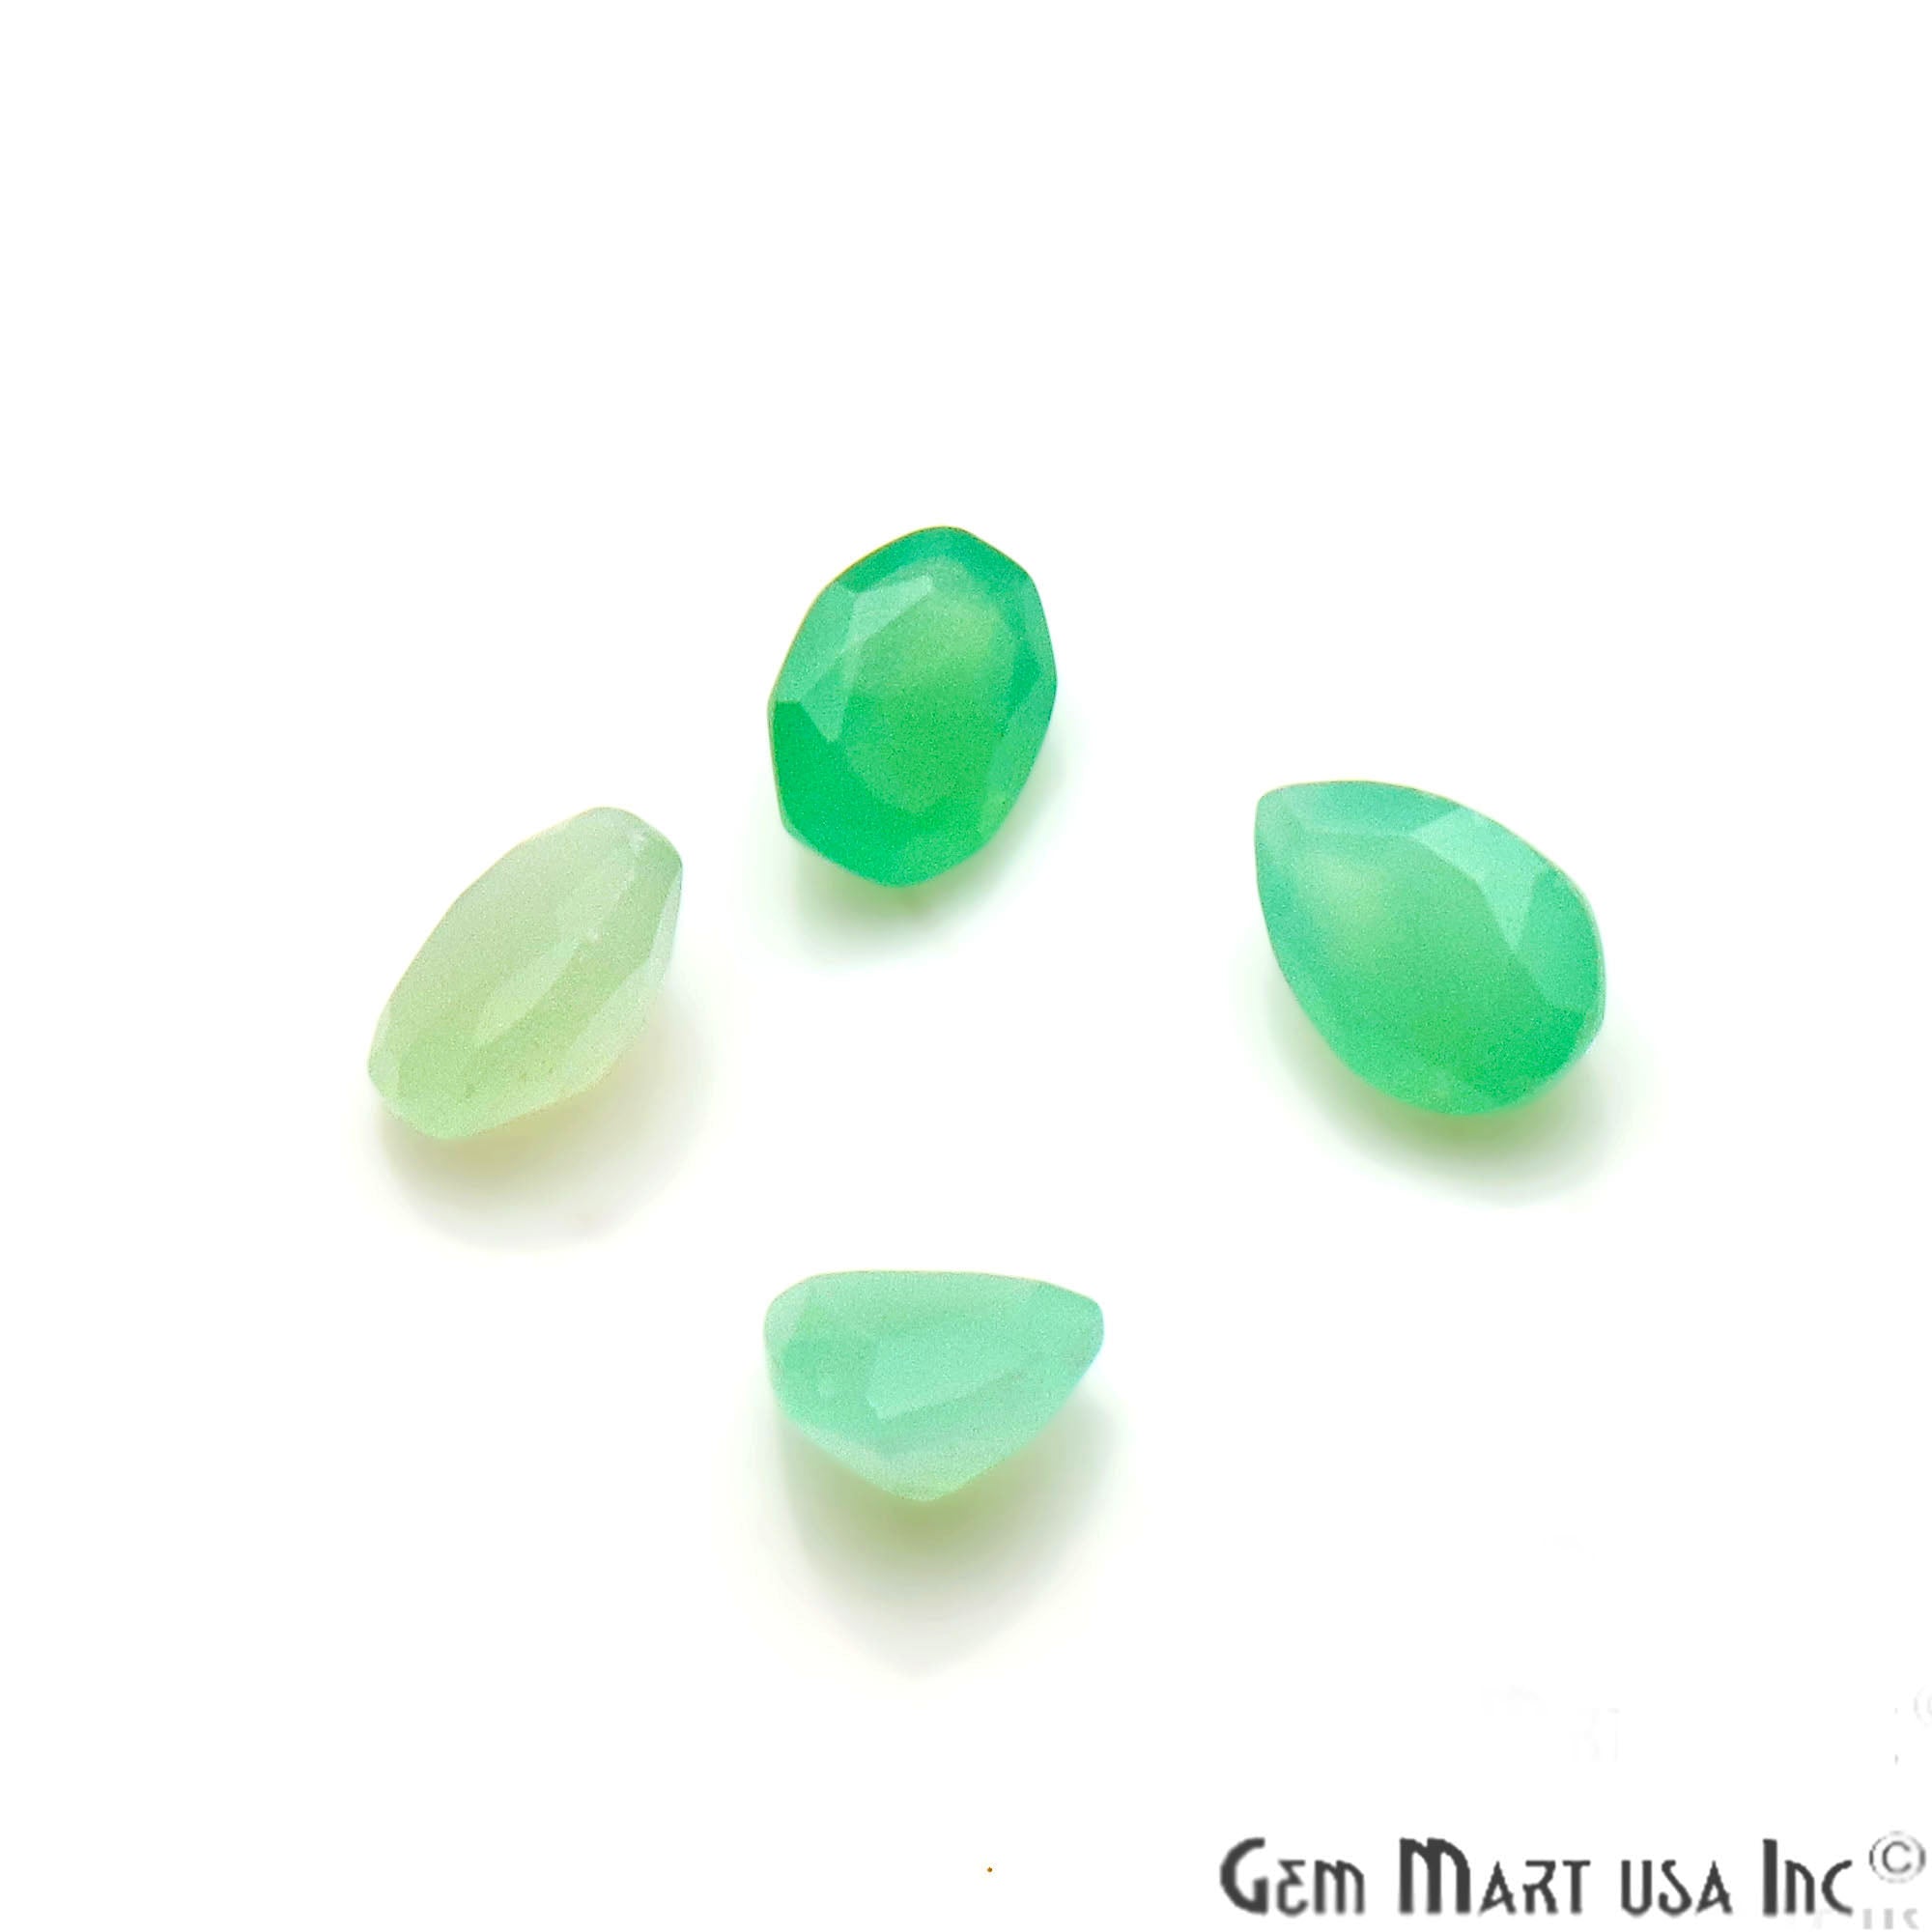 50ct Lot Chrysophrase Mix Shaped 7-8mm Stone, Faceted Gemstone Mixed lot, Loose Stones - GemMartUSA